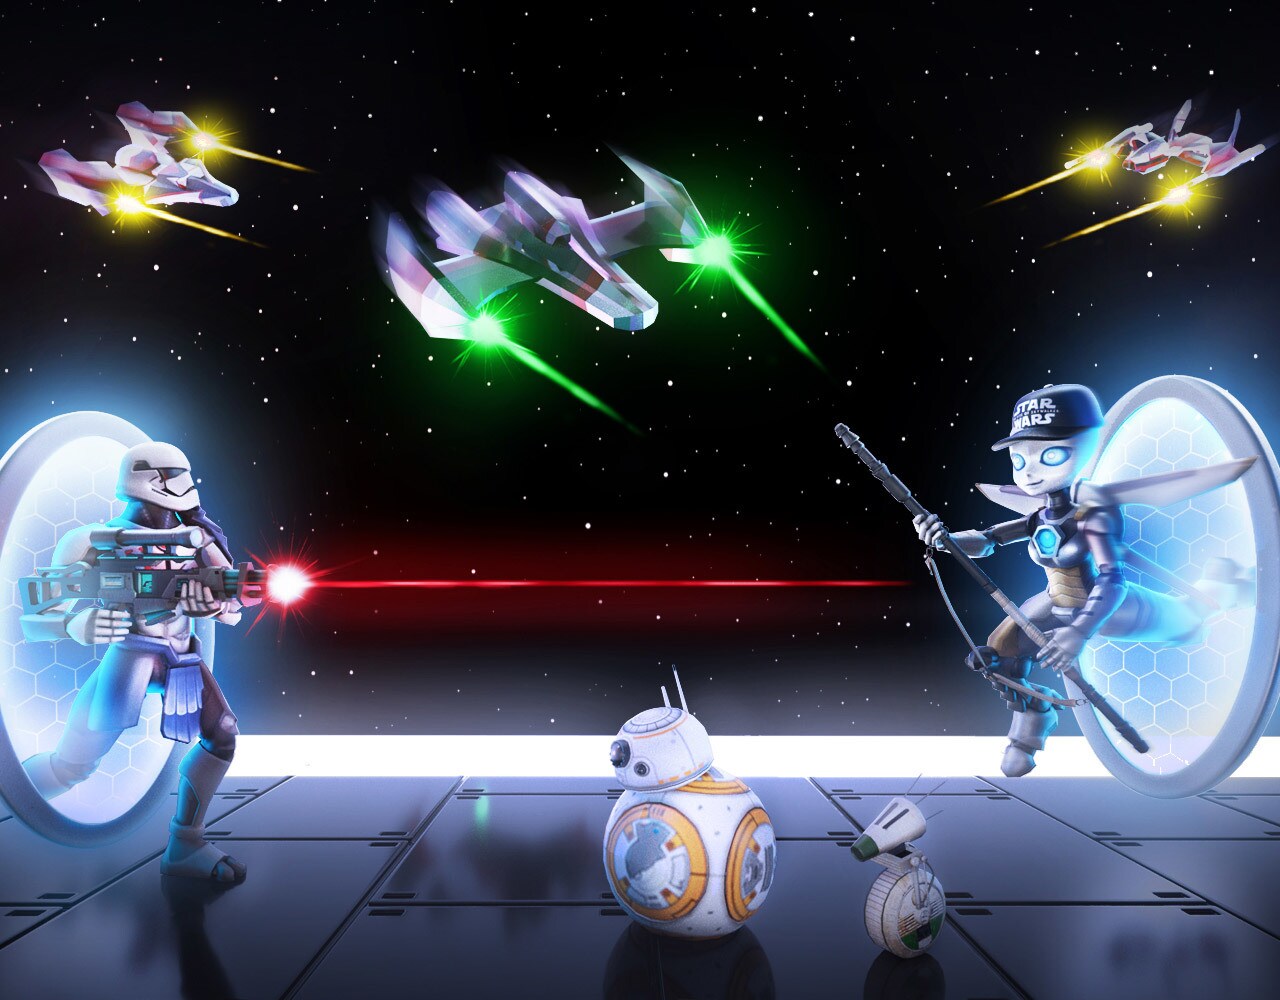 Star Wars joins forces with Roblox